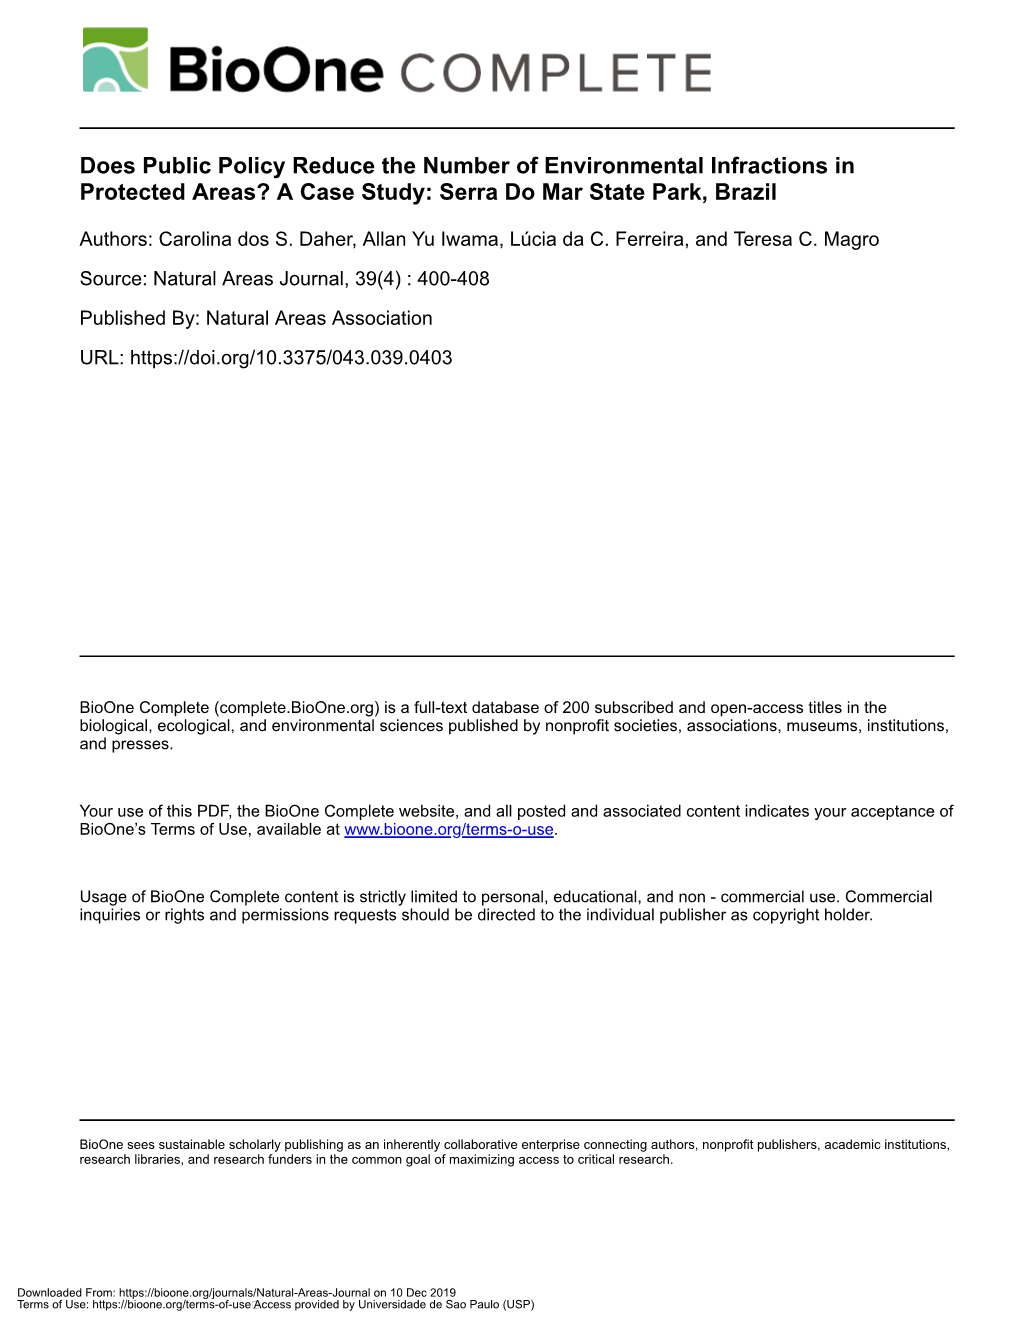 Does Public Policy Reduce the Number of Environmental Infractions in Protected Areas? a Case Study: Serra Do Mar State Park, Brazil